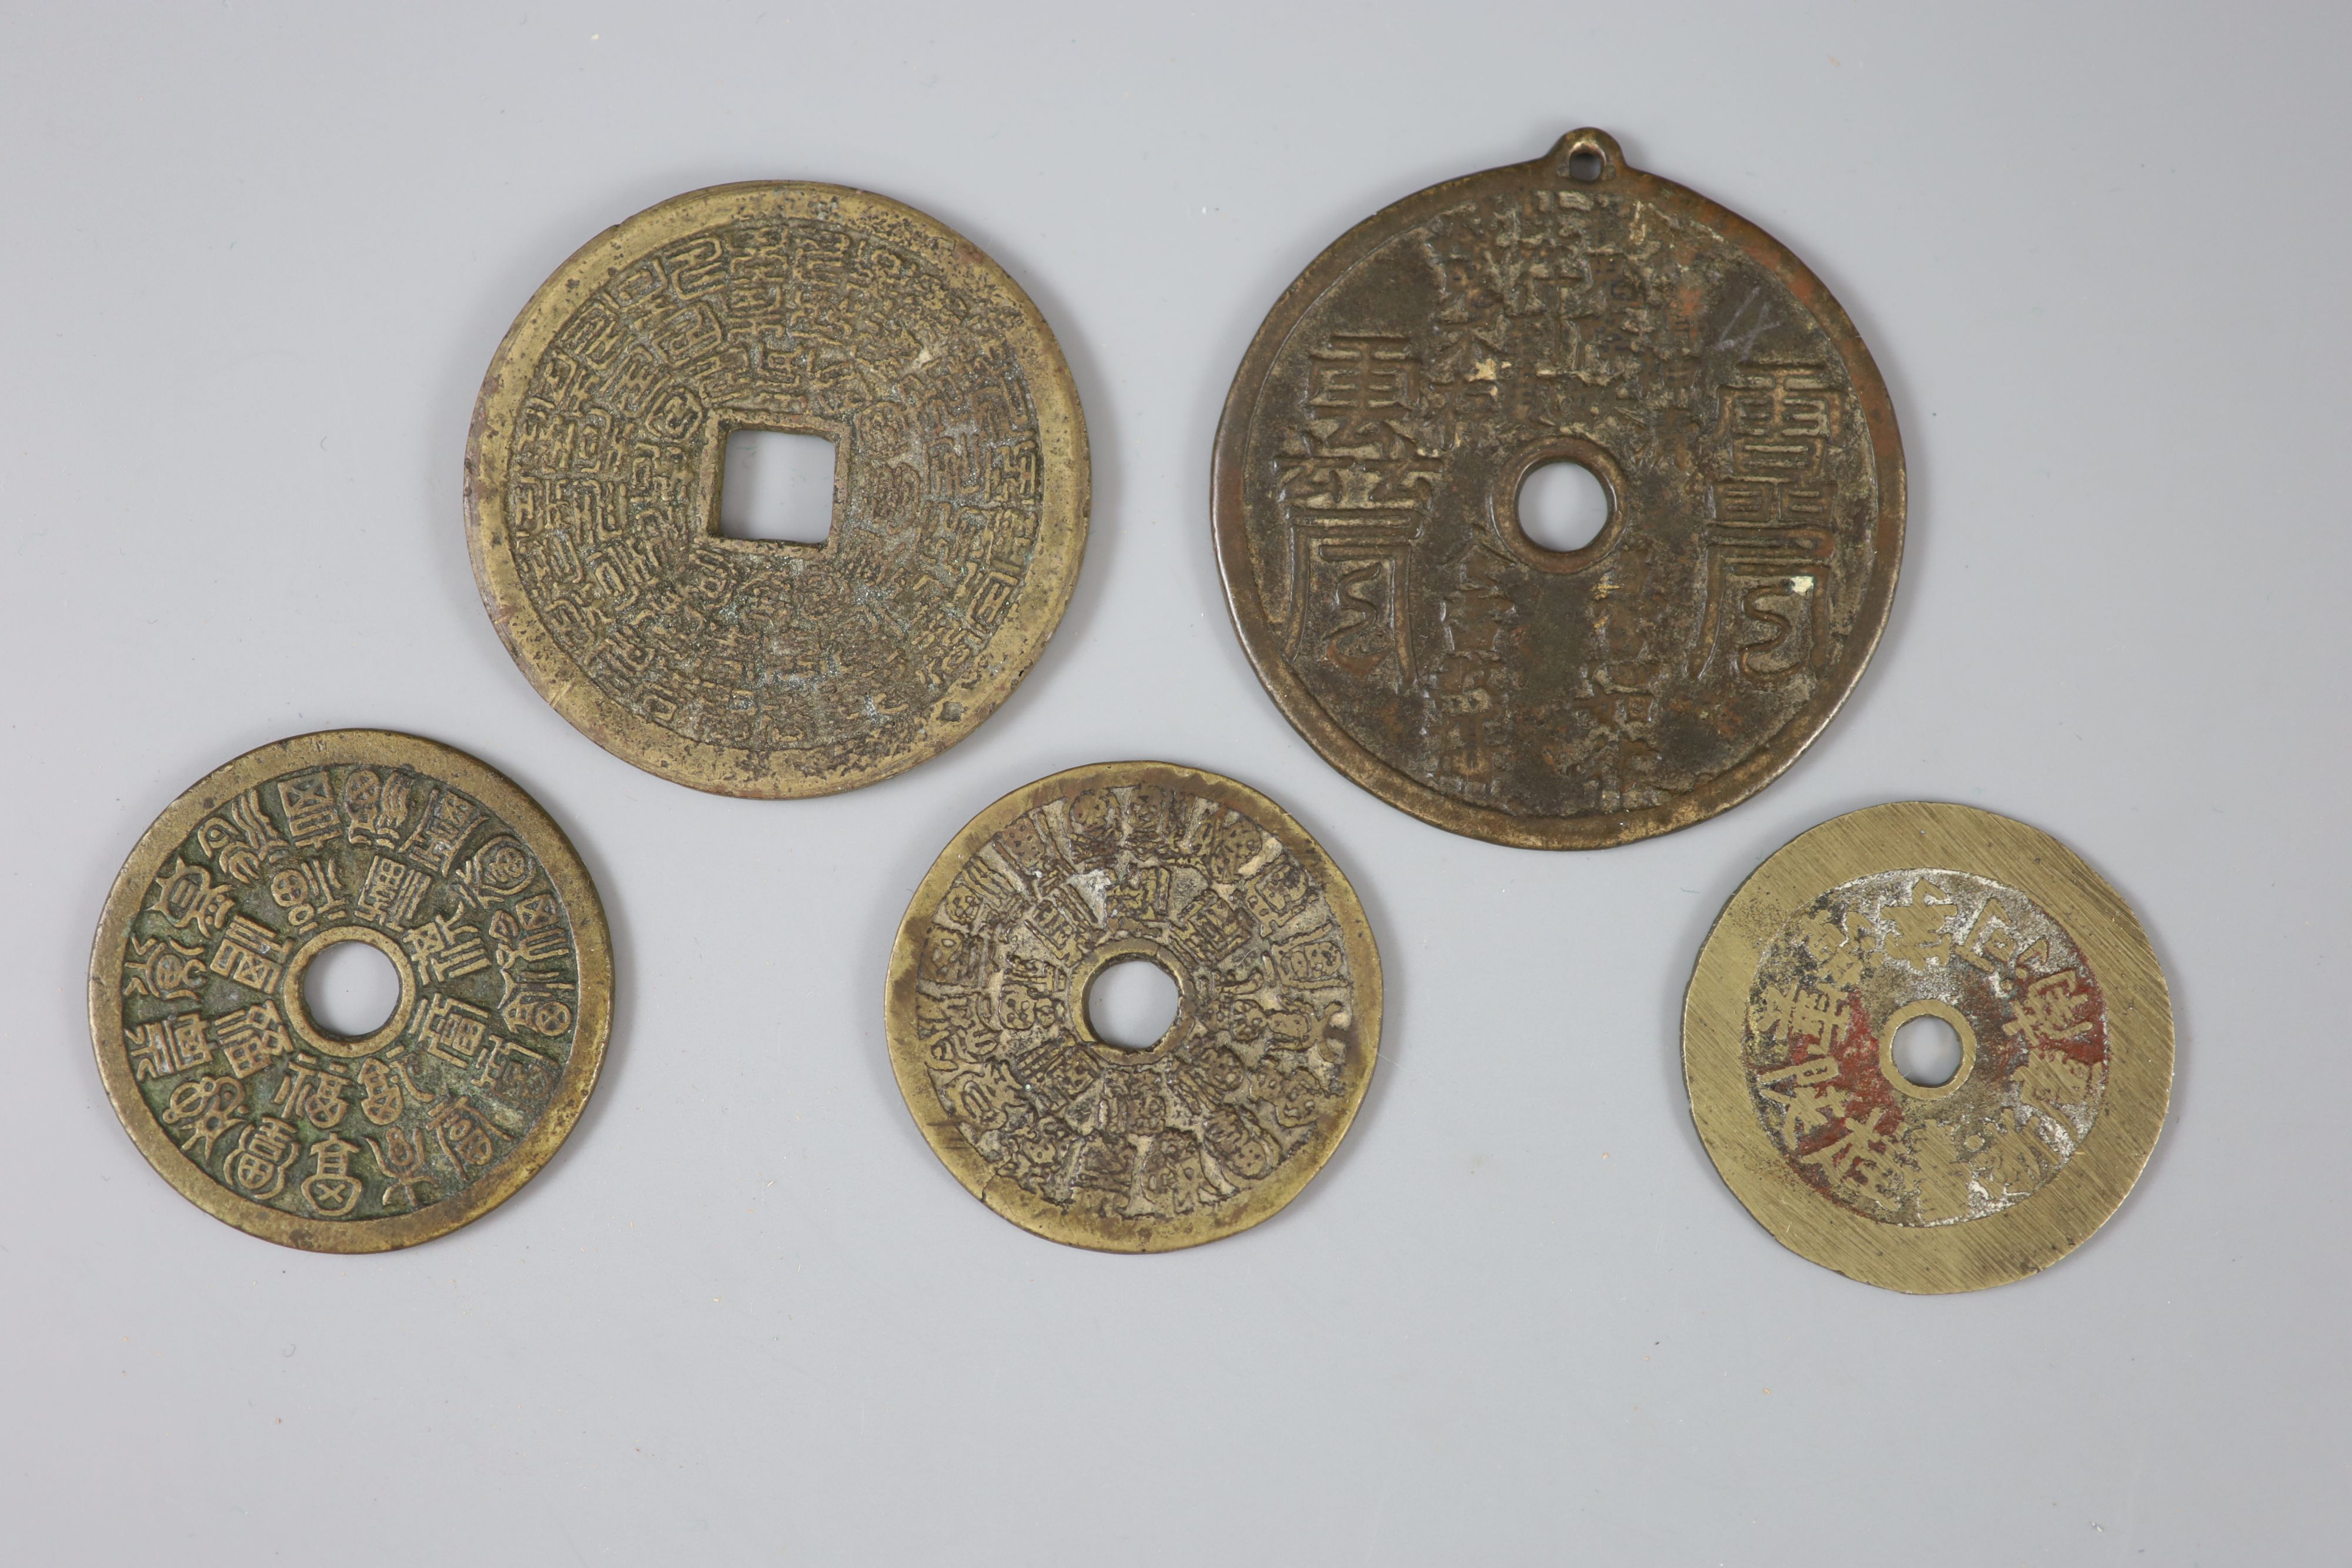 China, 5 large cast bronze charms or amulets, Qing dynasty,